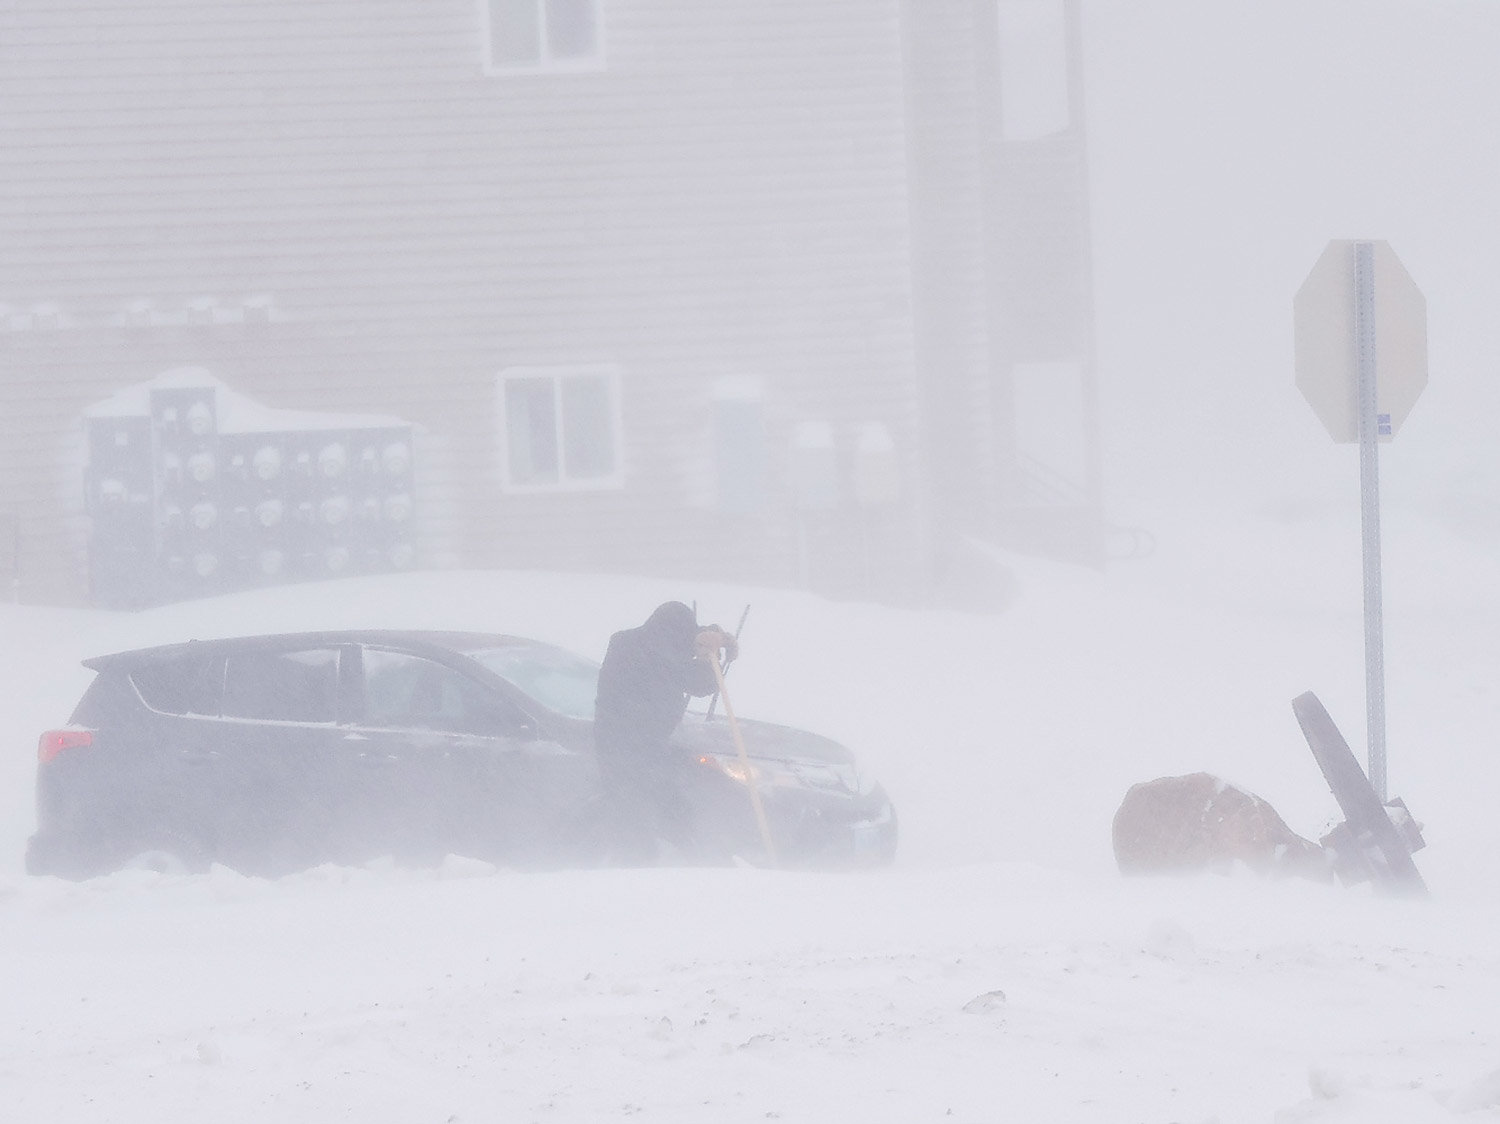  An exhausted man takes a break from the task of attempting to shovel his vehicle out of deep snow at a northwest Minot intersection Tuesday morning